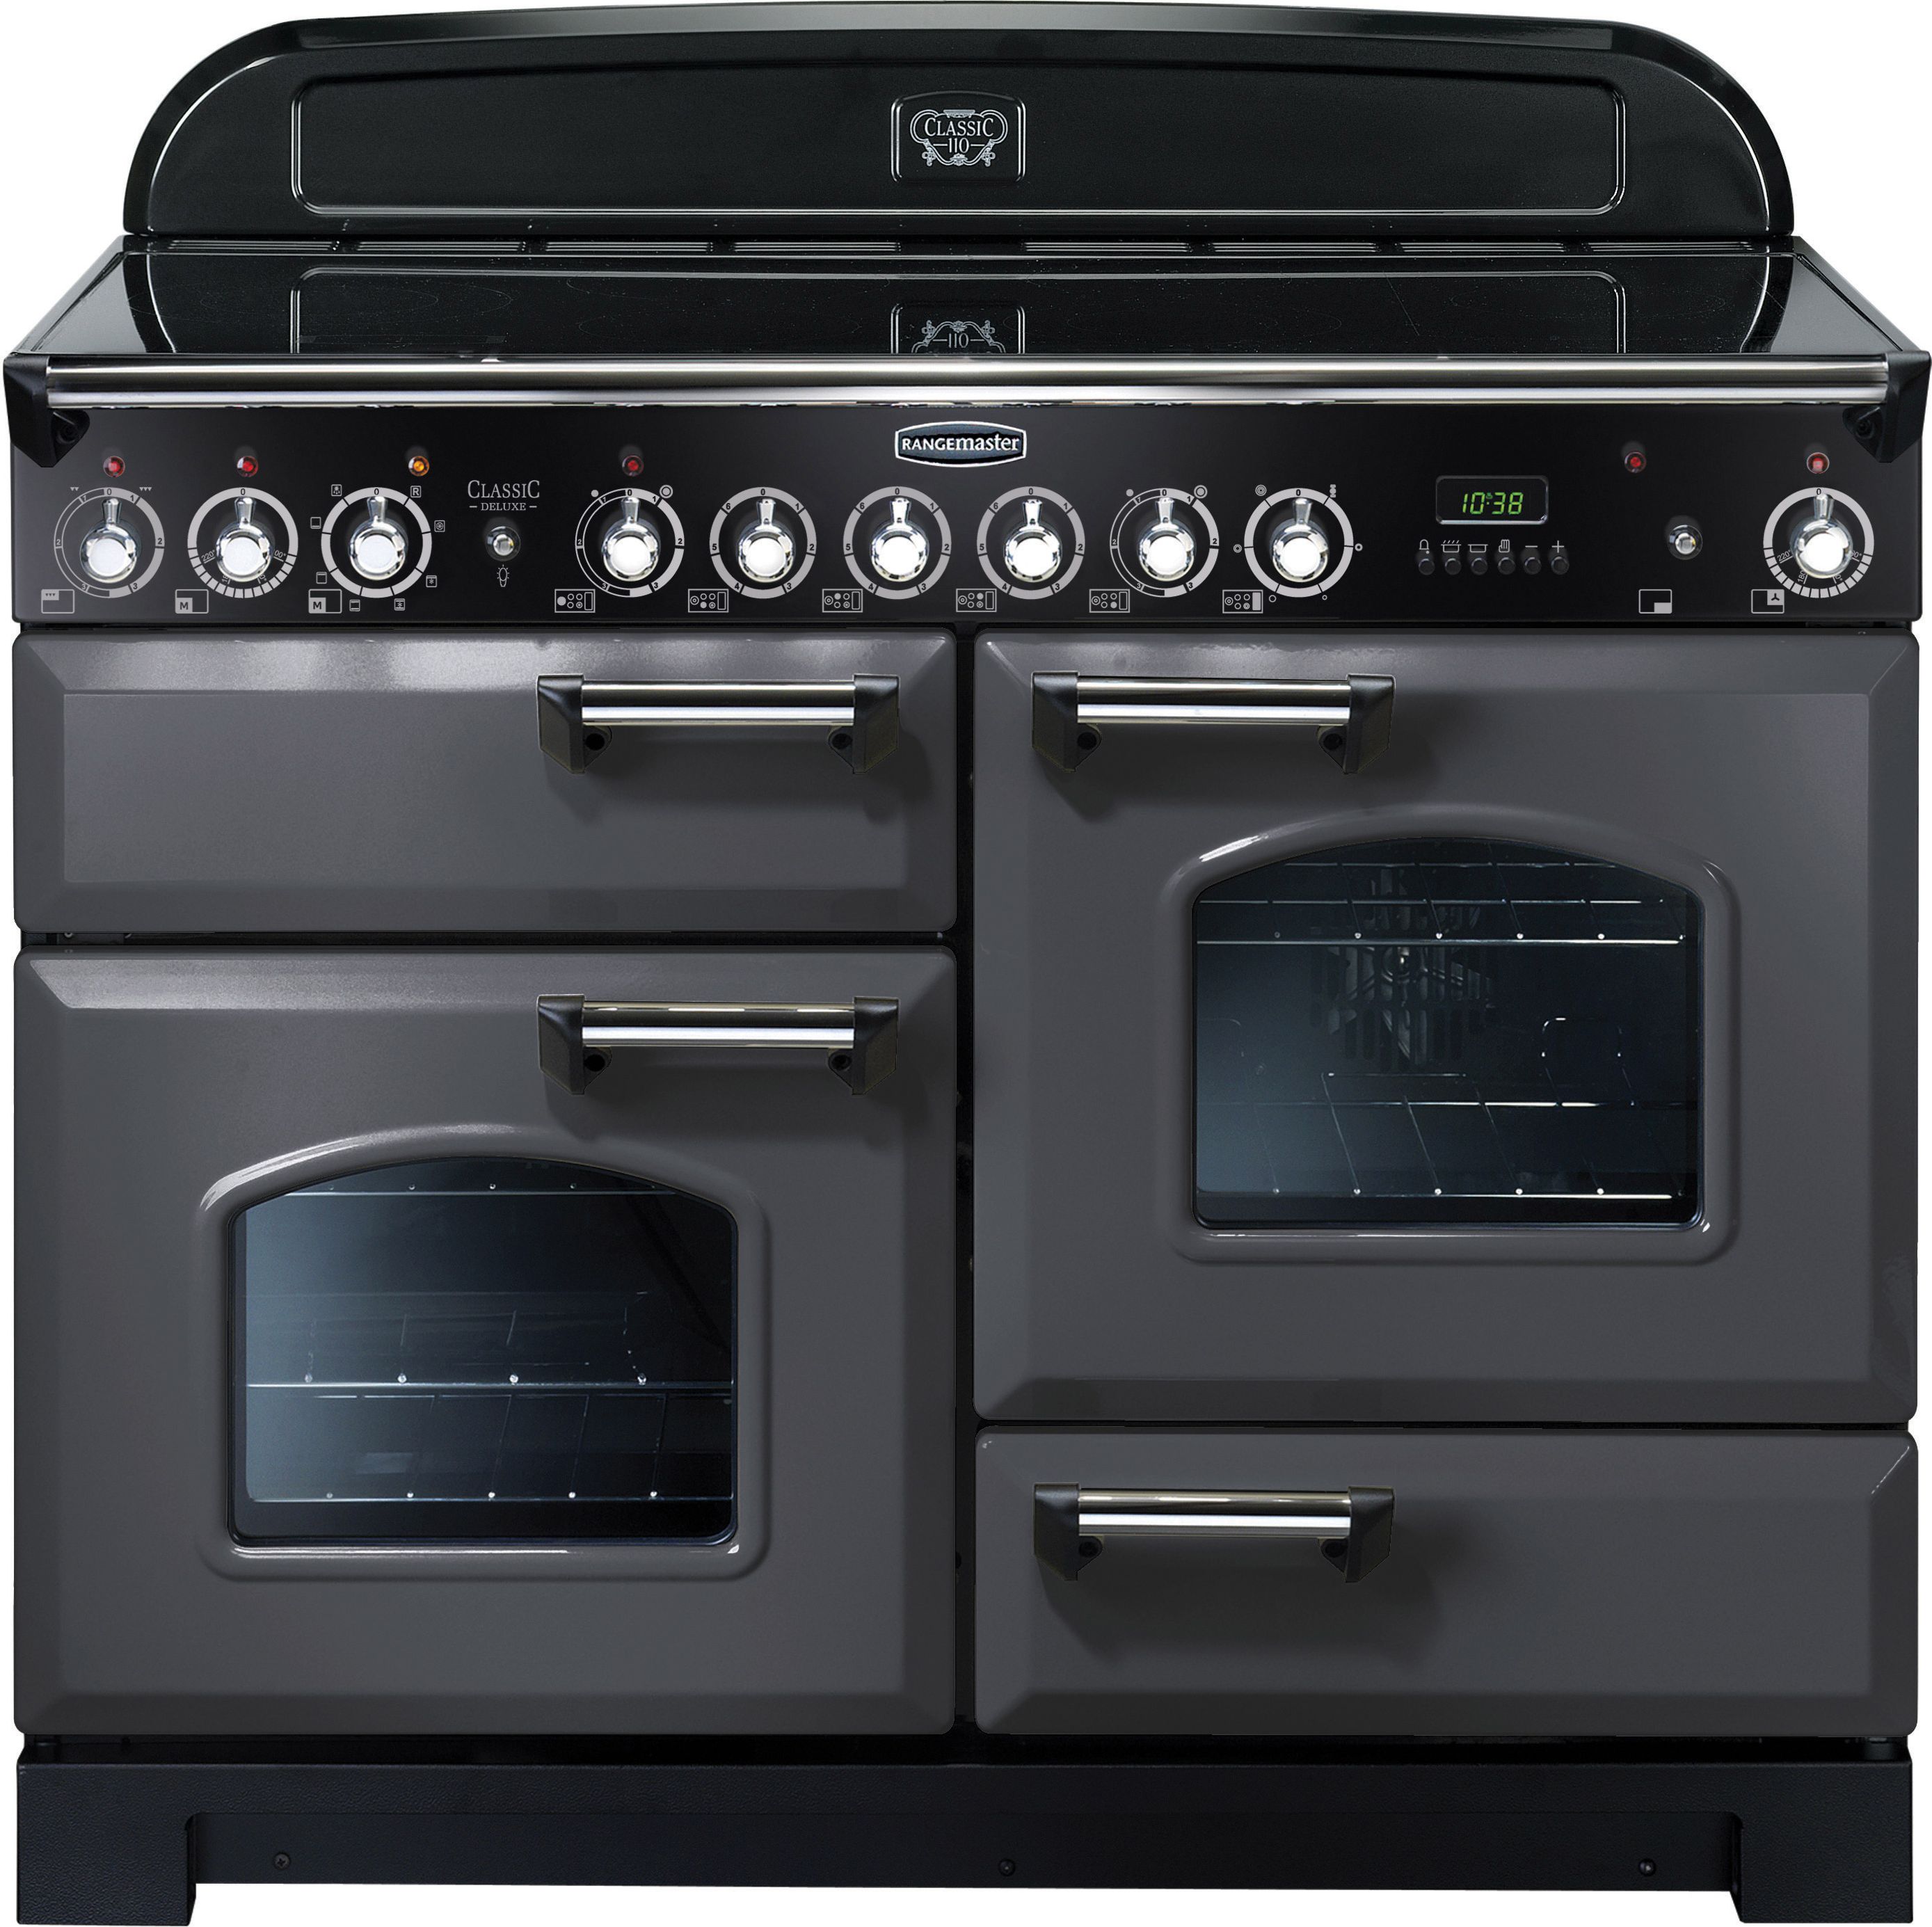 Rangemaster Classic Deluxe CDL110ECSL/C 110cm Electric Range Cooker with Ceramic Hob - Slate Grey / Chrome - A/A Rated, Grey